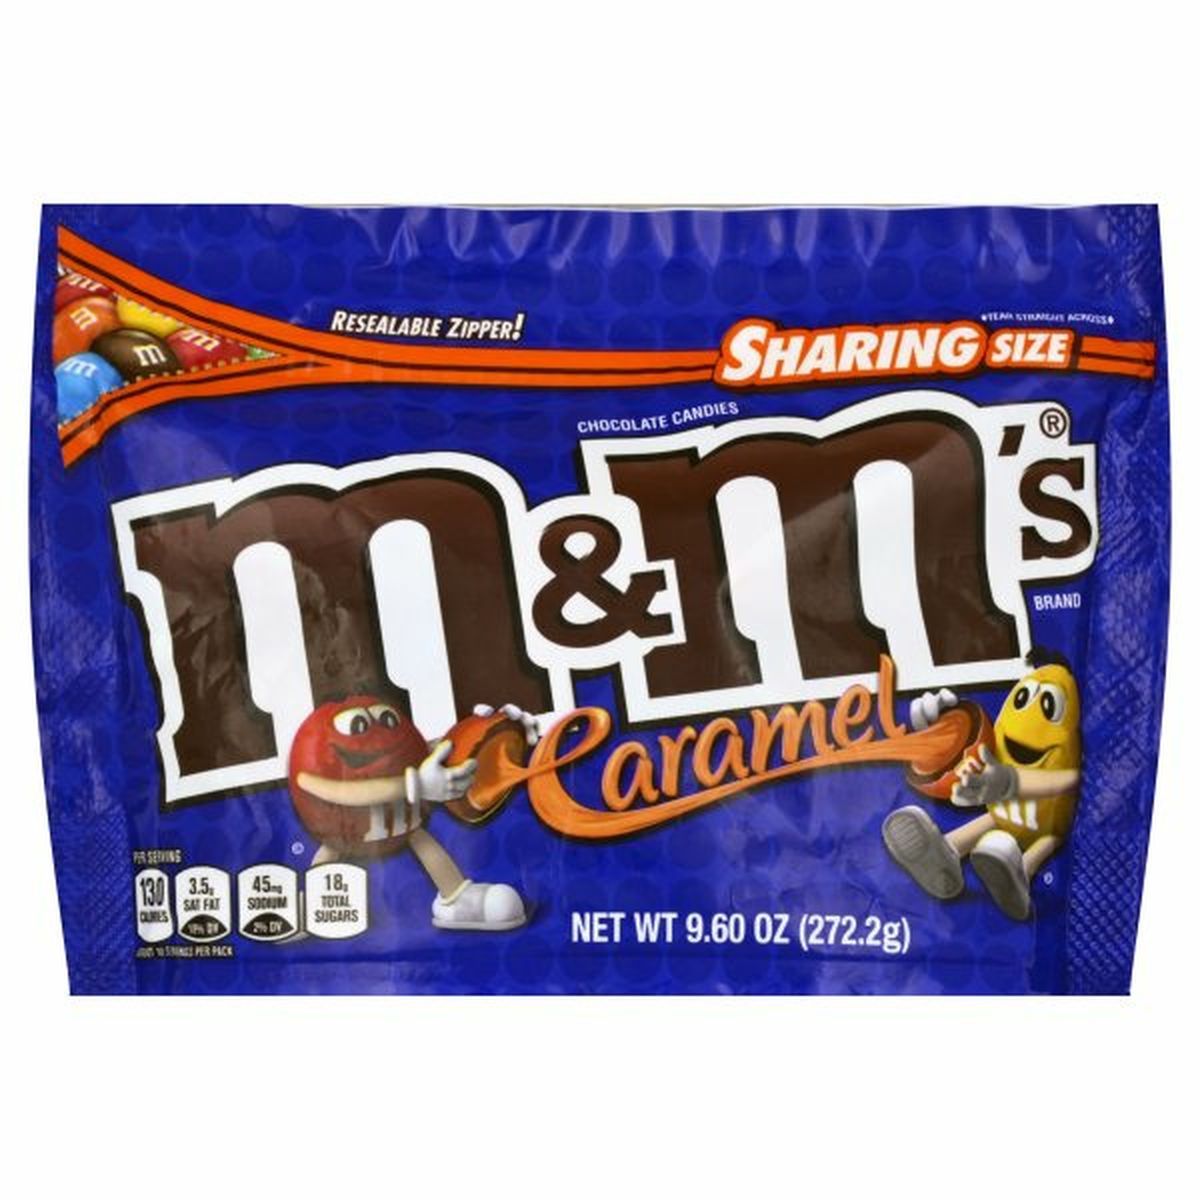 Calories in M&M's Chocolate Candies, Caramel, Sharing Size